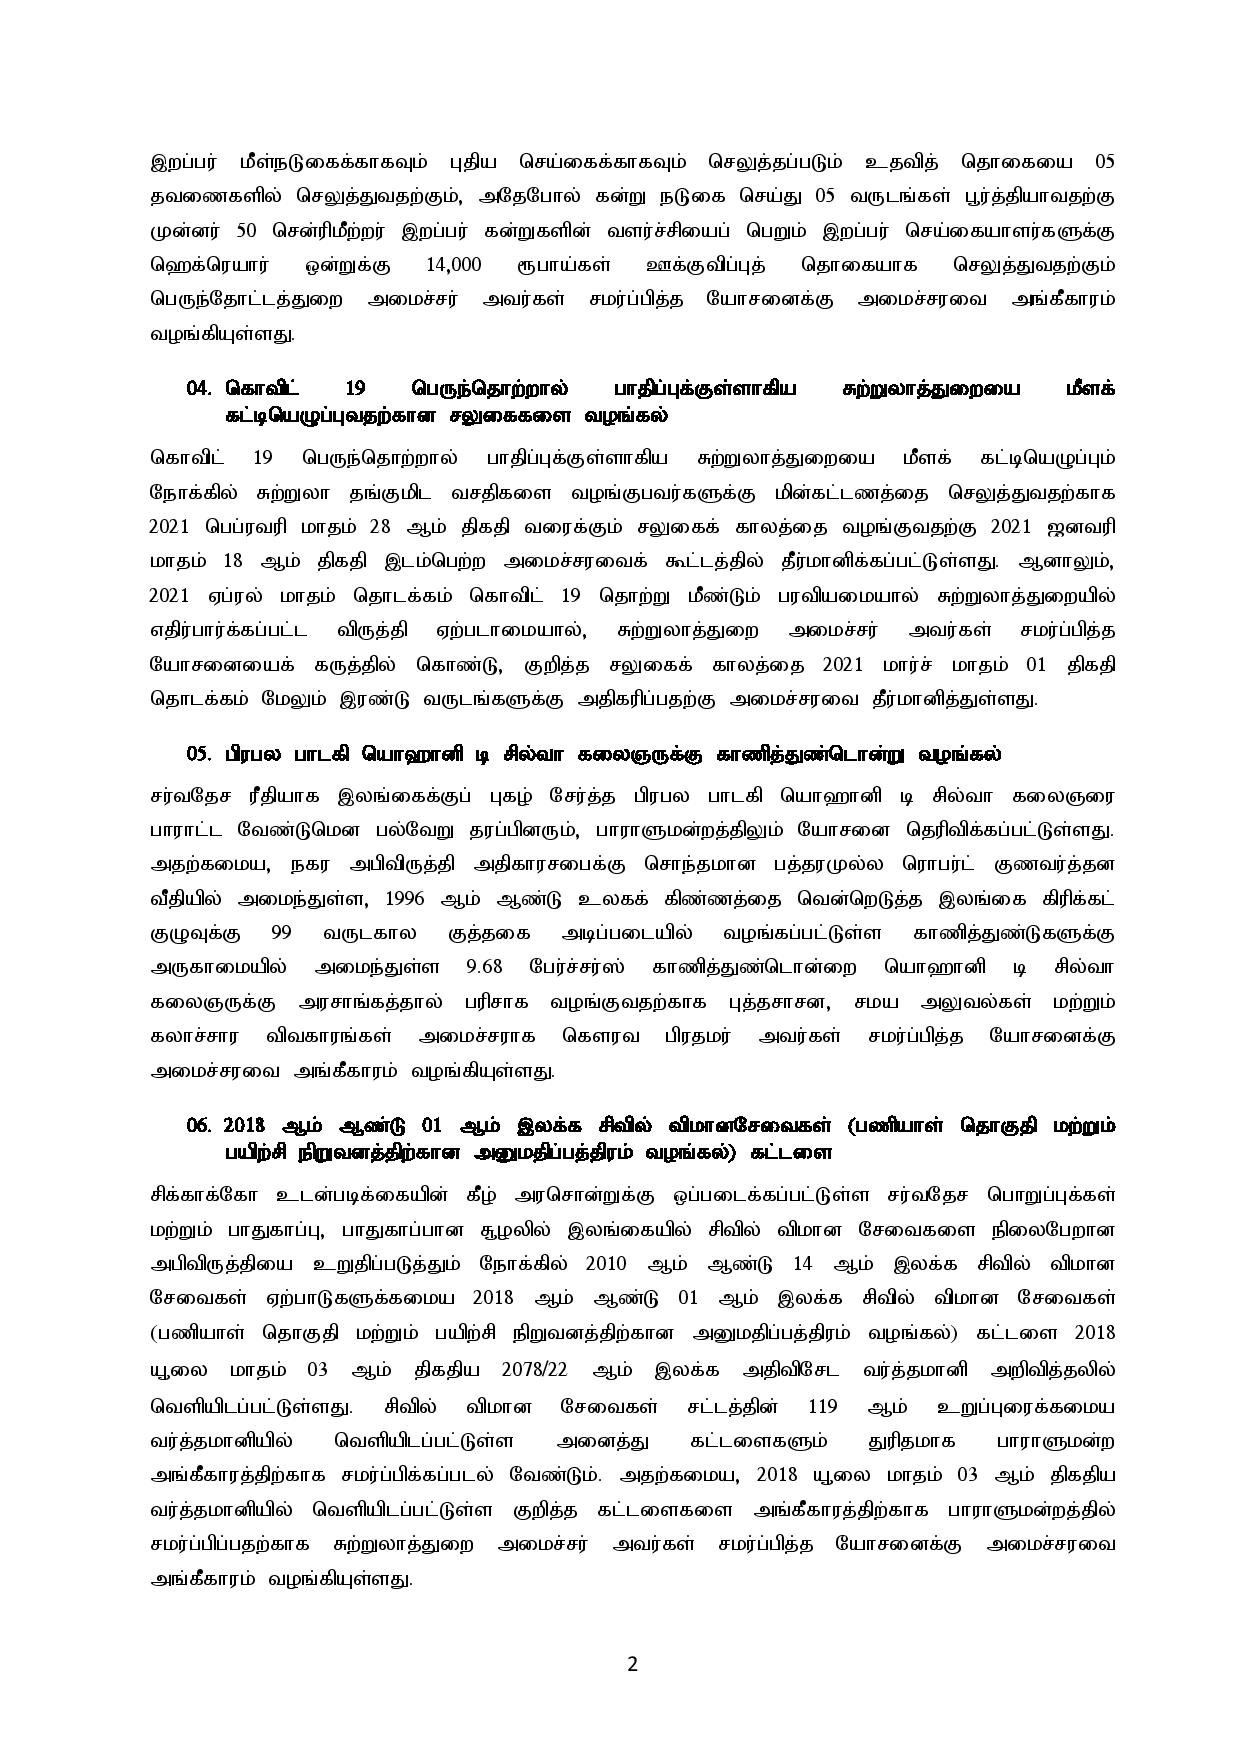 Cabinet Decisions on 20.12.2021 Tamil page 002